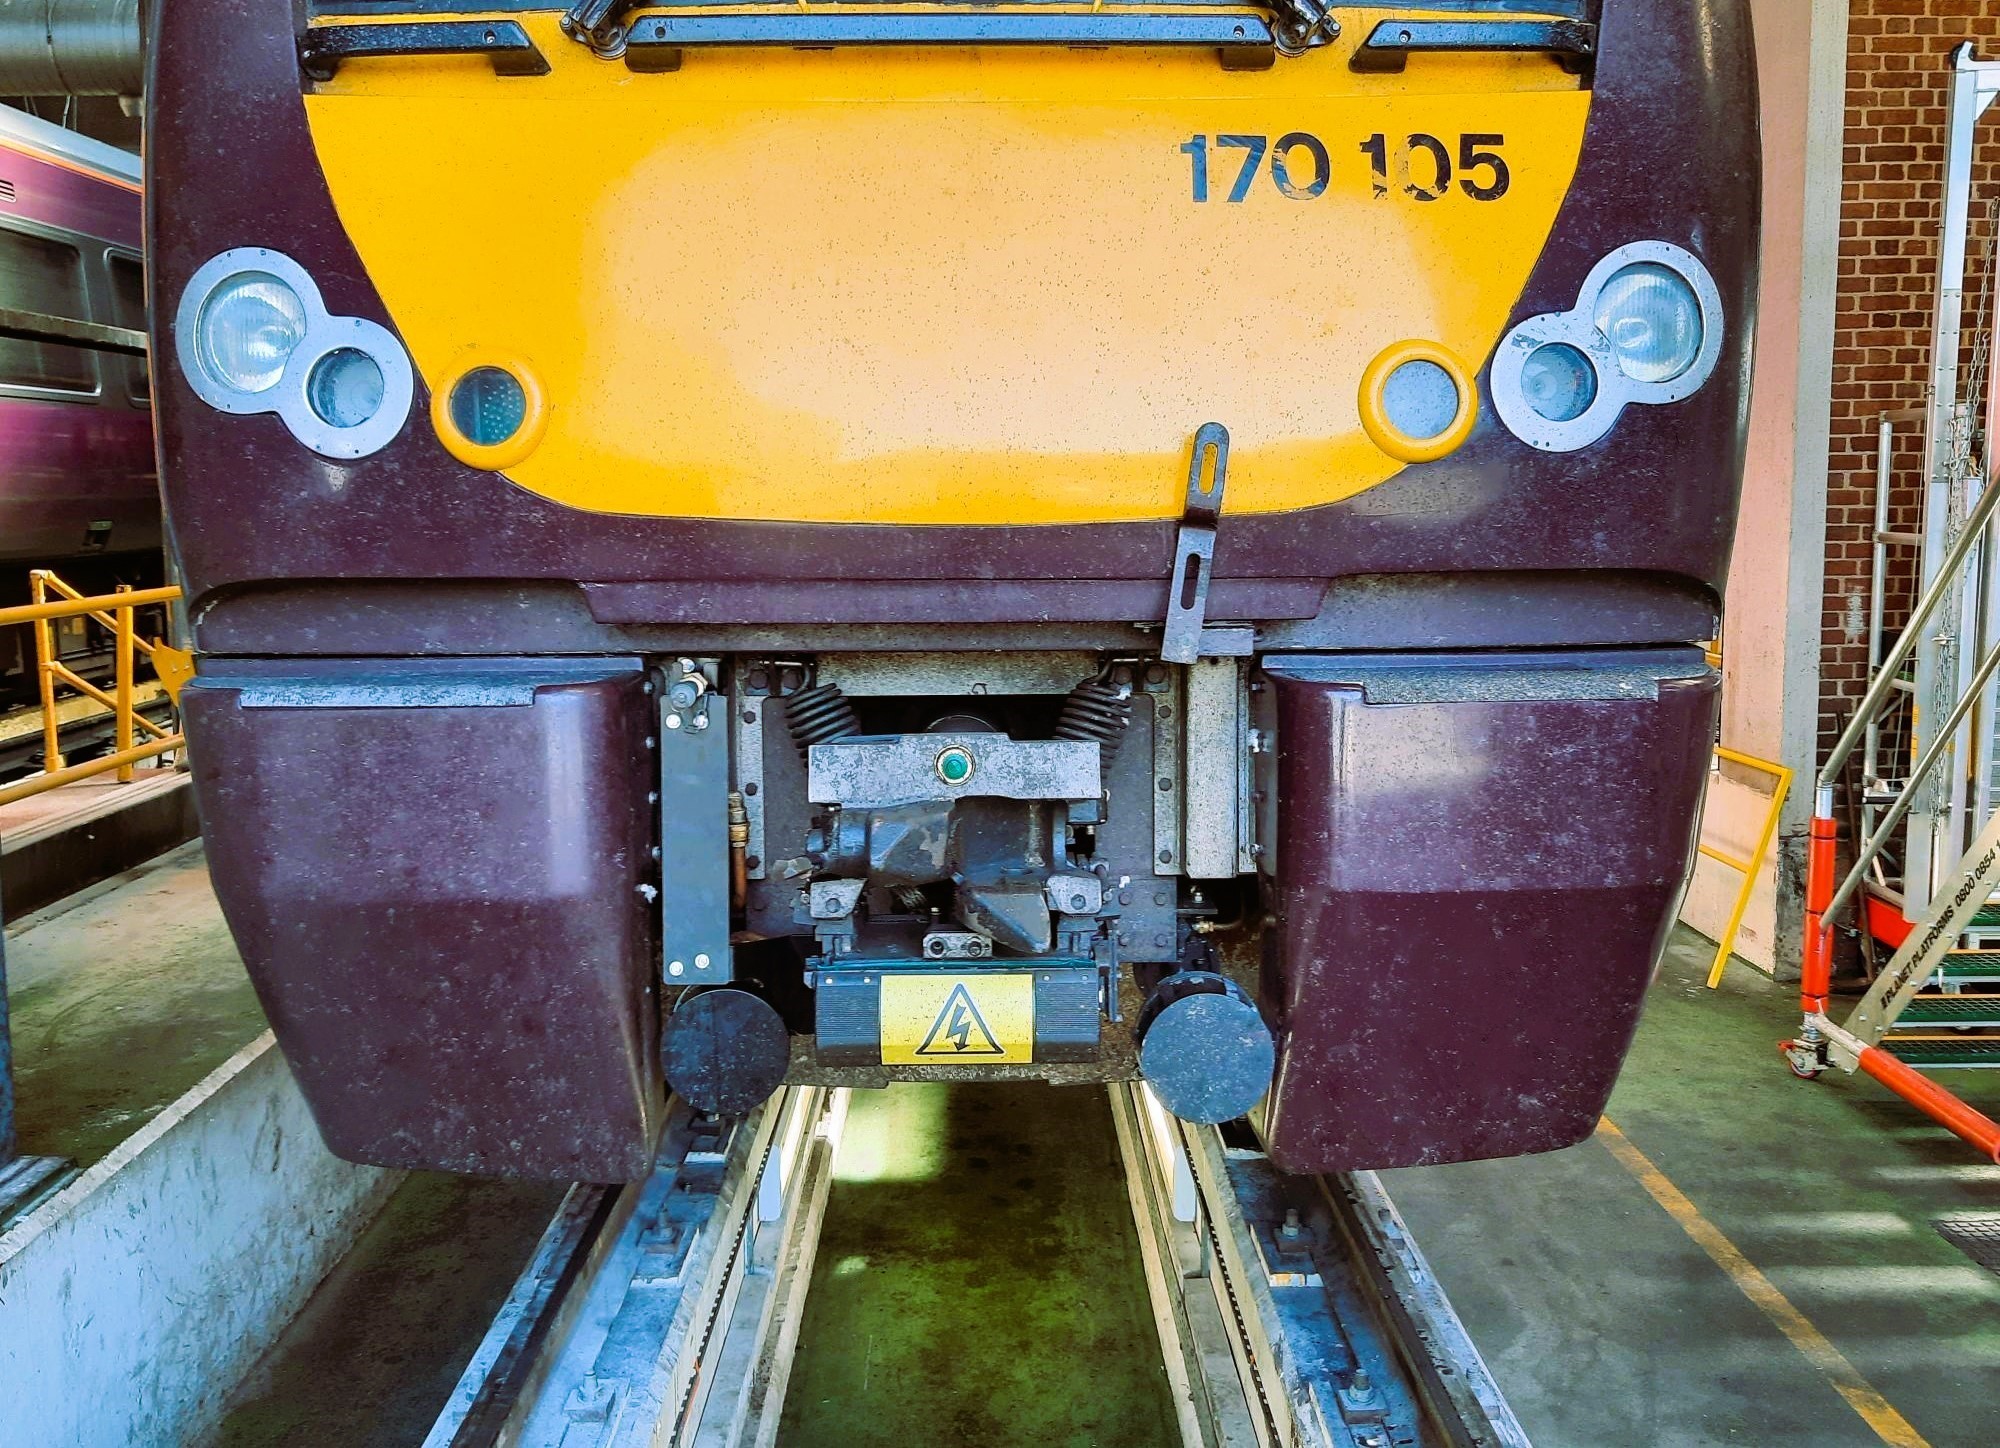 Belvoir Rail Supplies Front-End Plates for Cross Country Trains